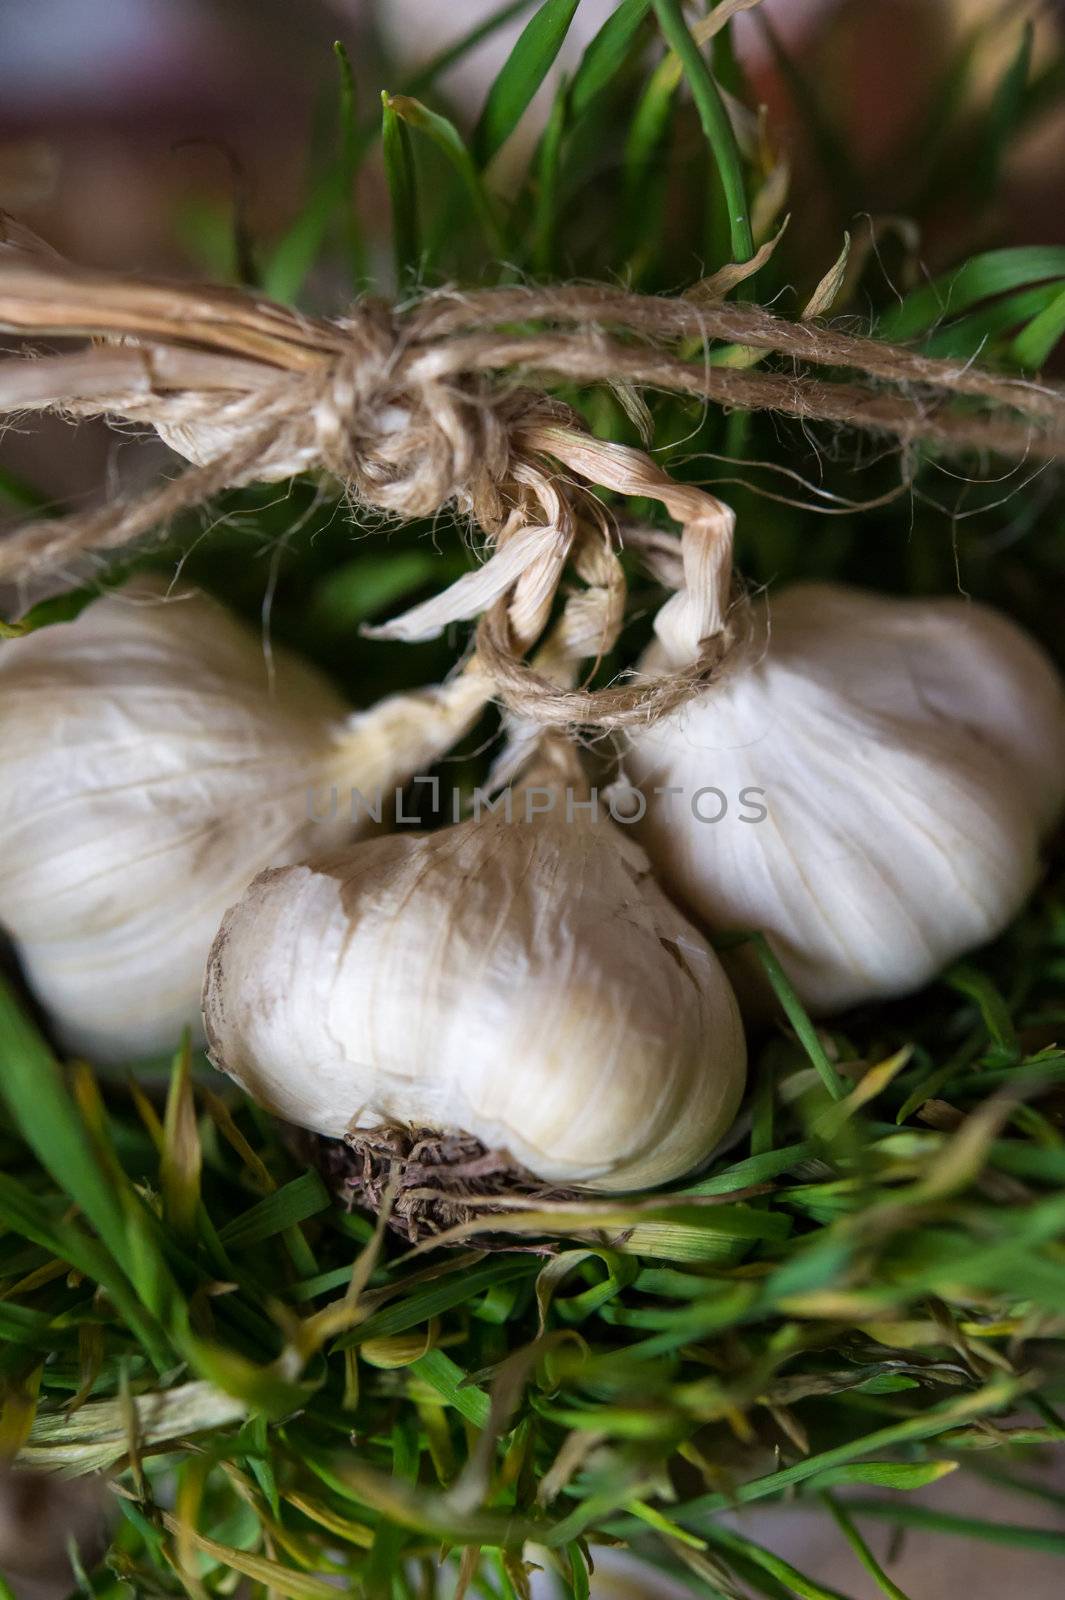 Vintage still life with tied garlic on green grass by kirs-ua